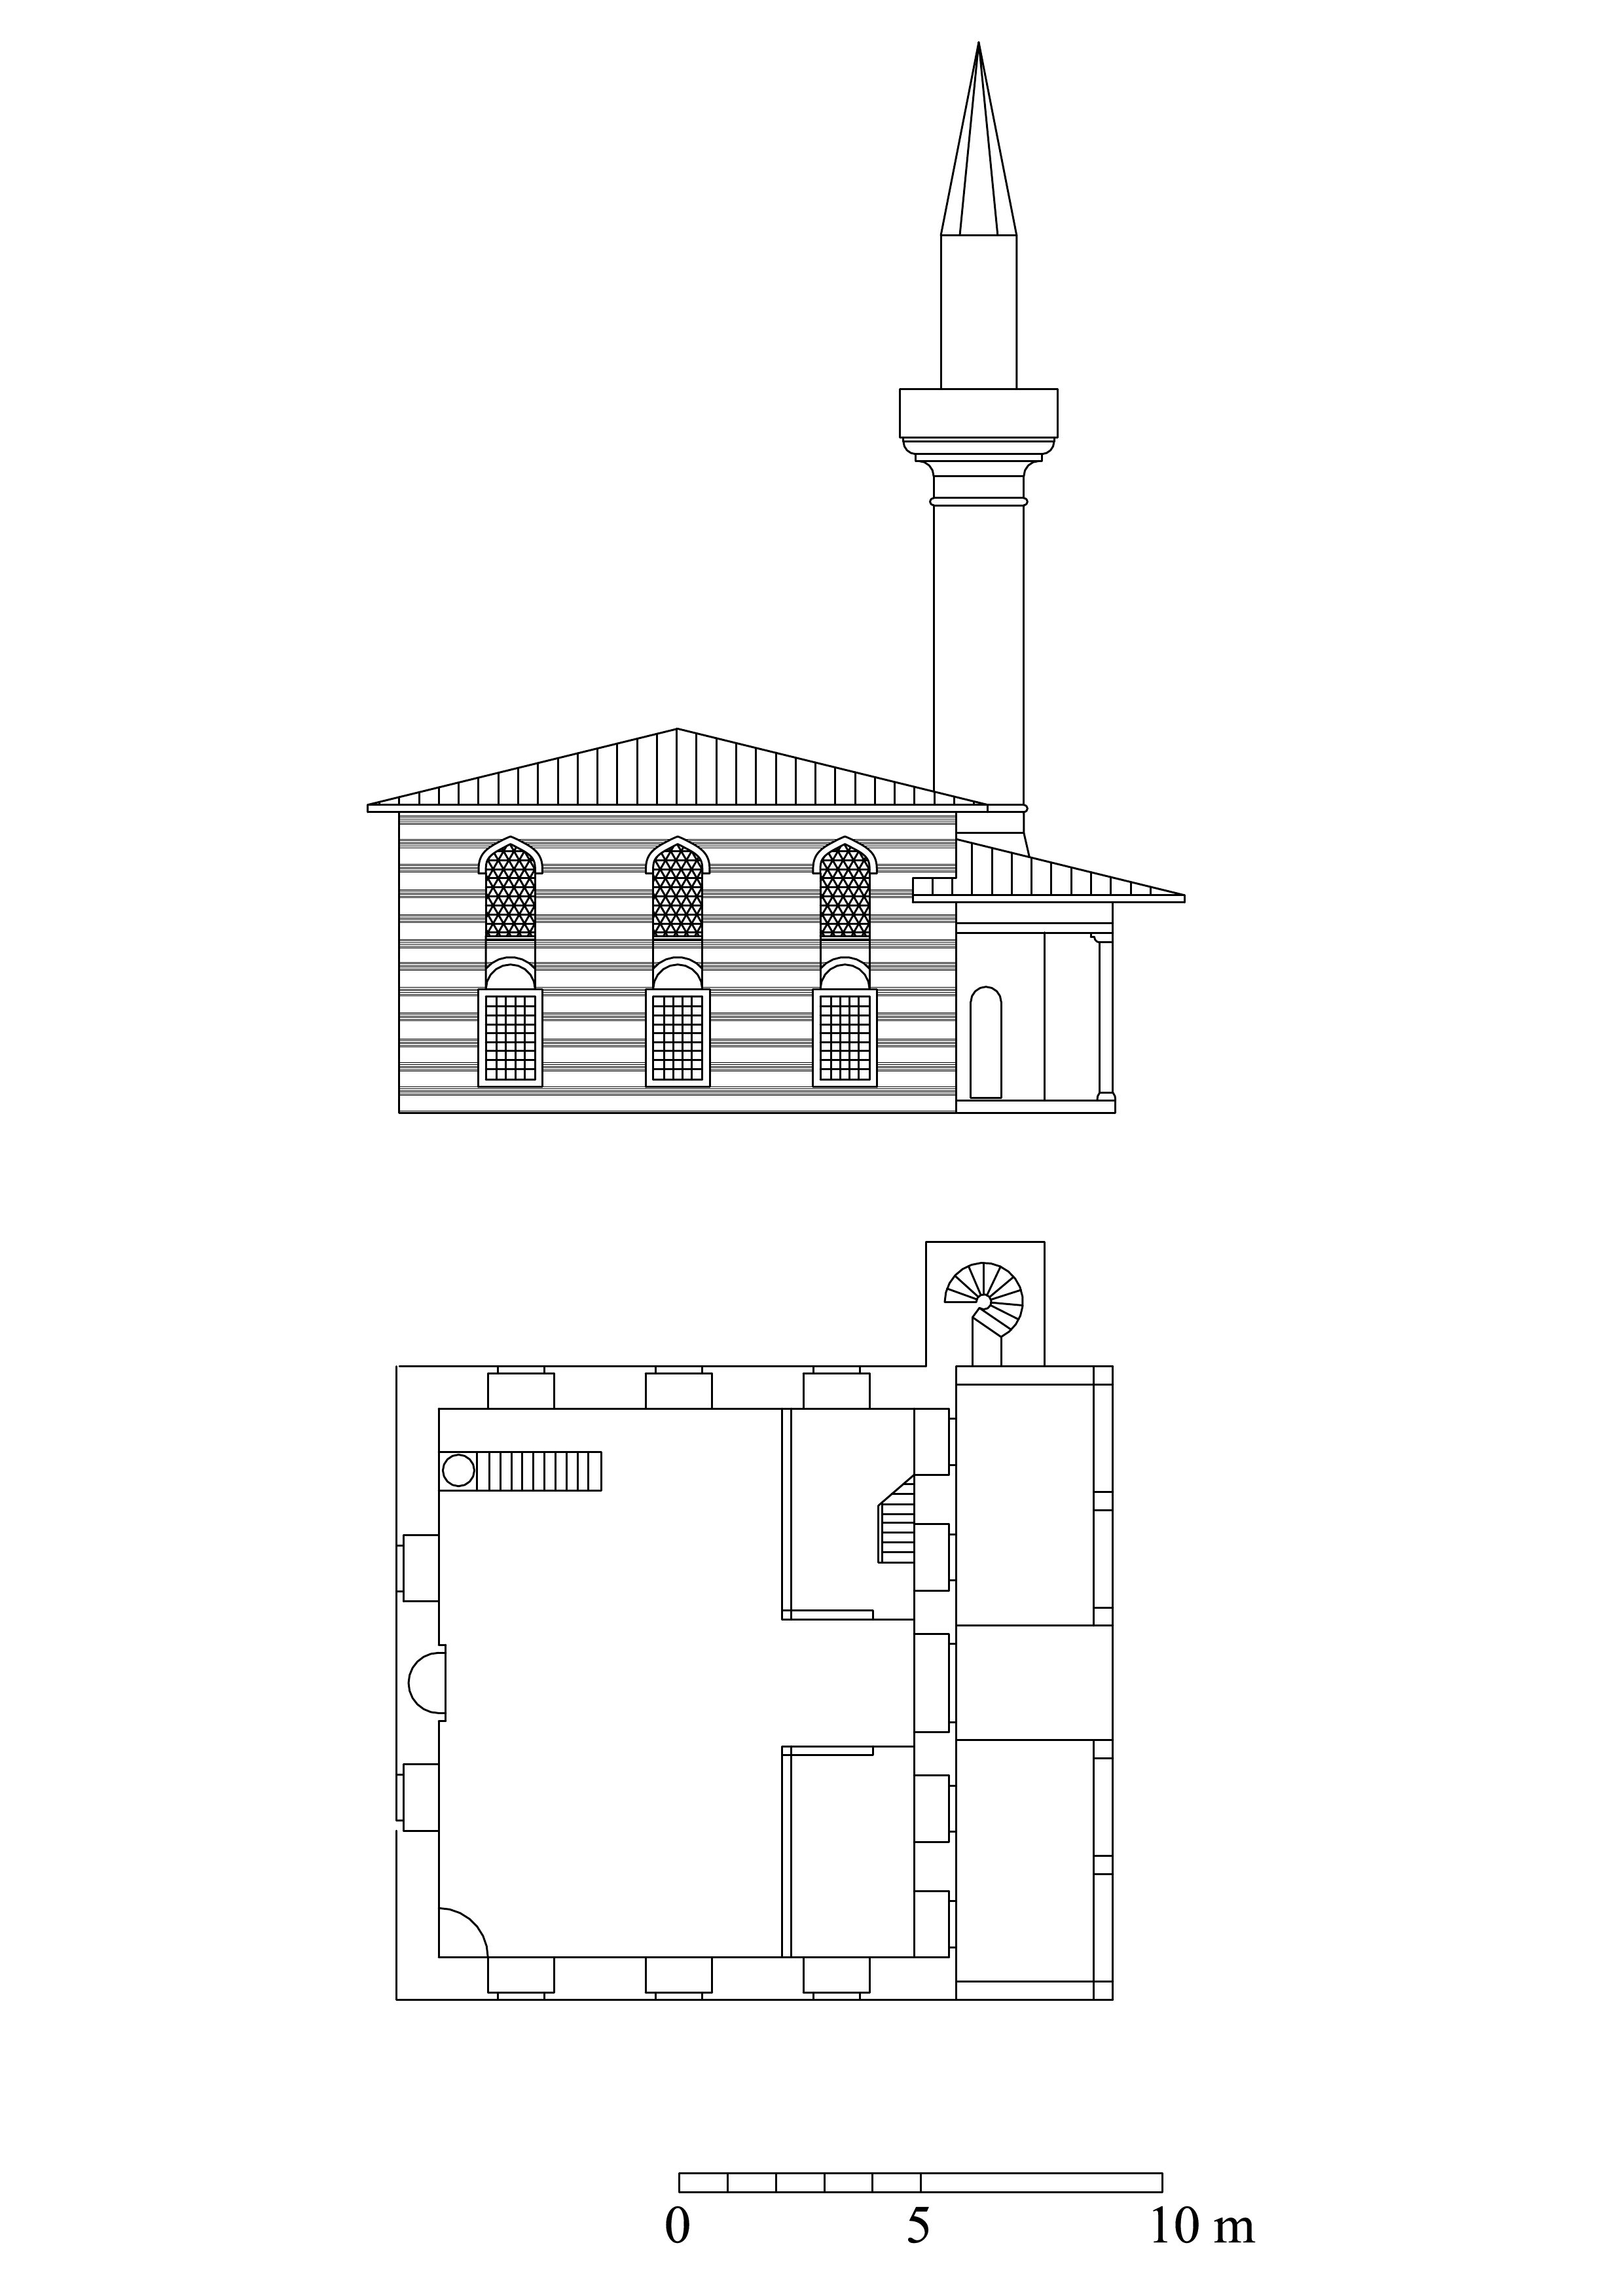 Floor plan and elevation of Shah Sultan Mosque